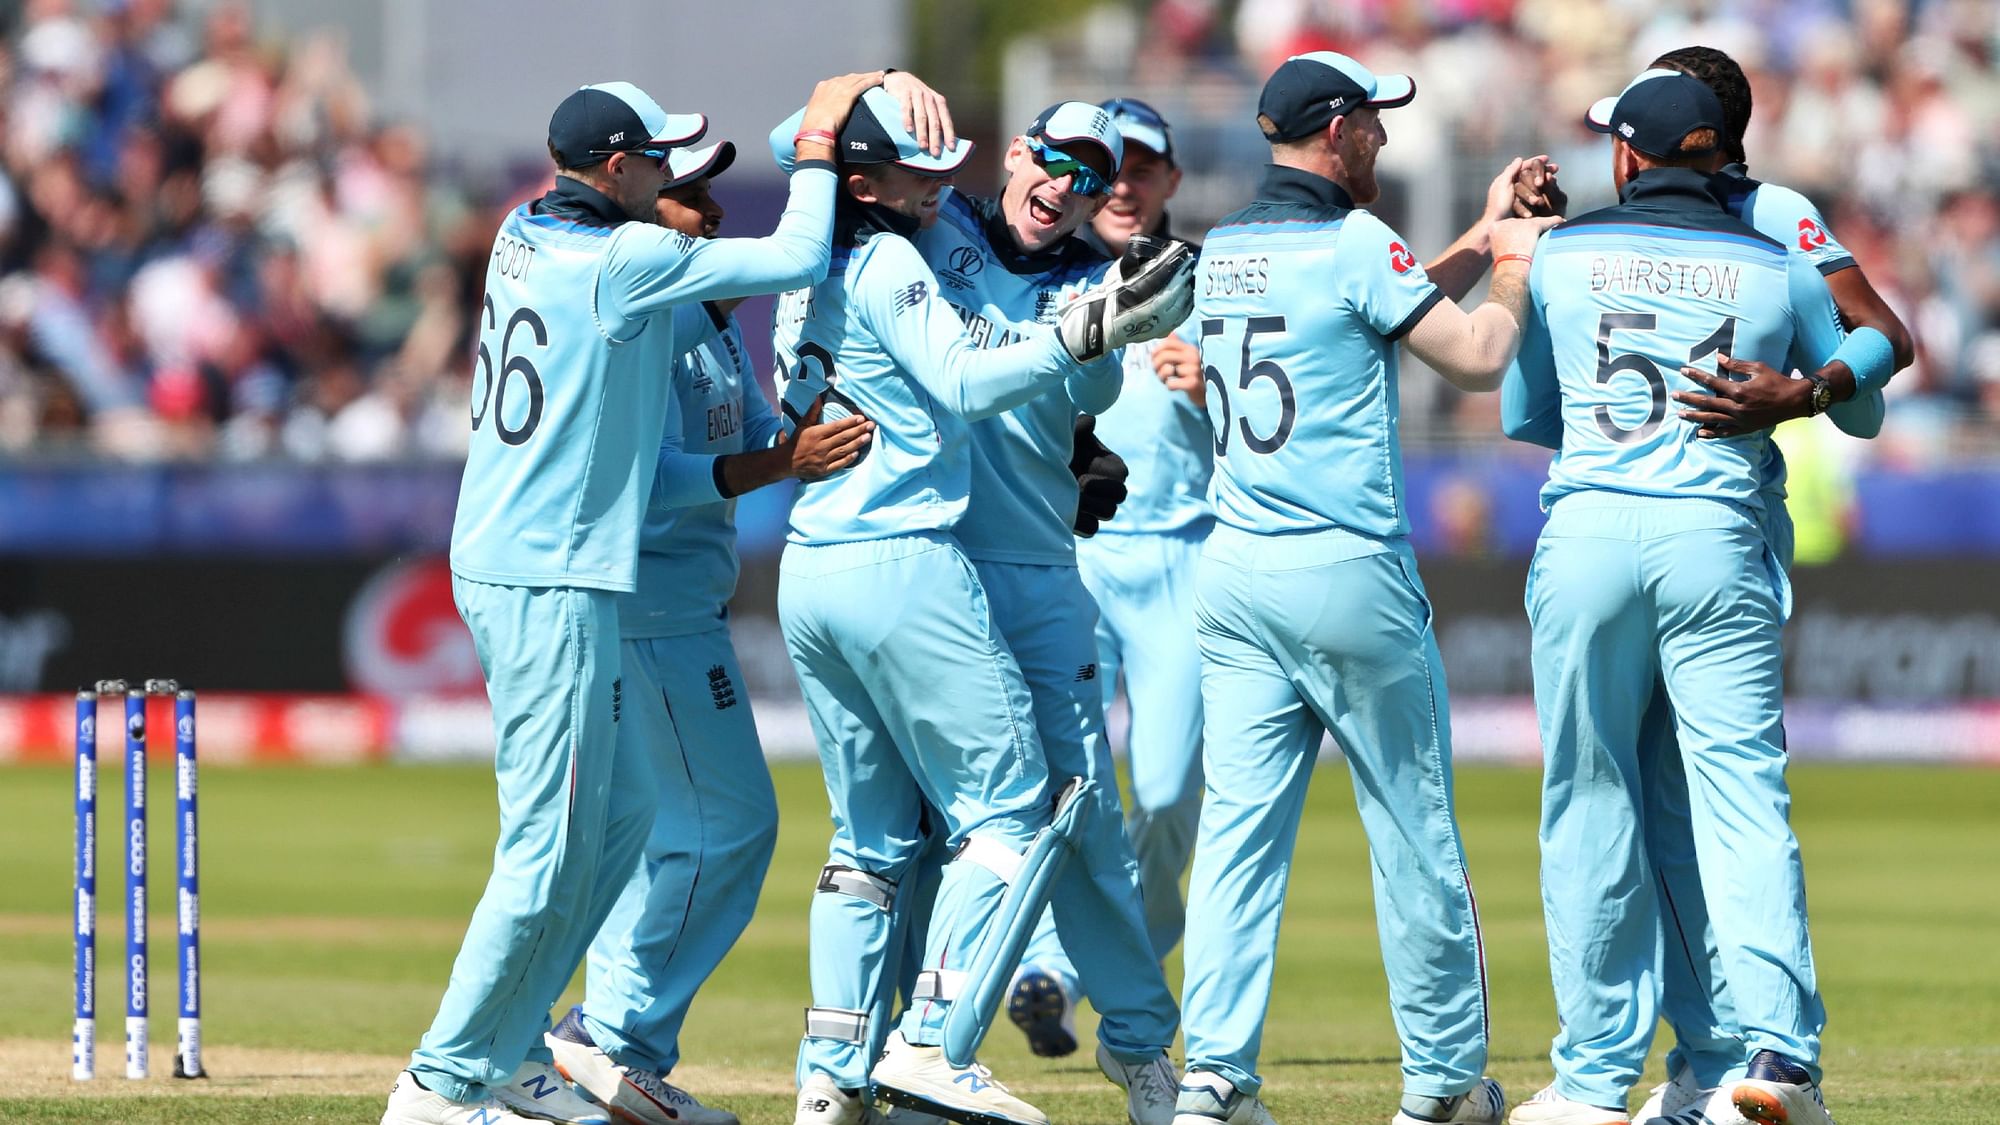 England entered the World Cup semifinals for the first time since the 1992 edition, beating an erring New Zealand by 119 runs.